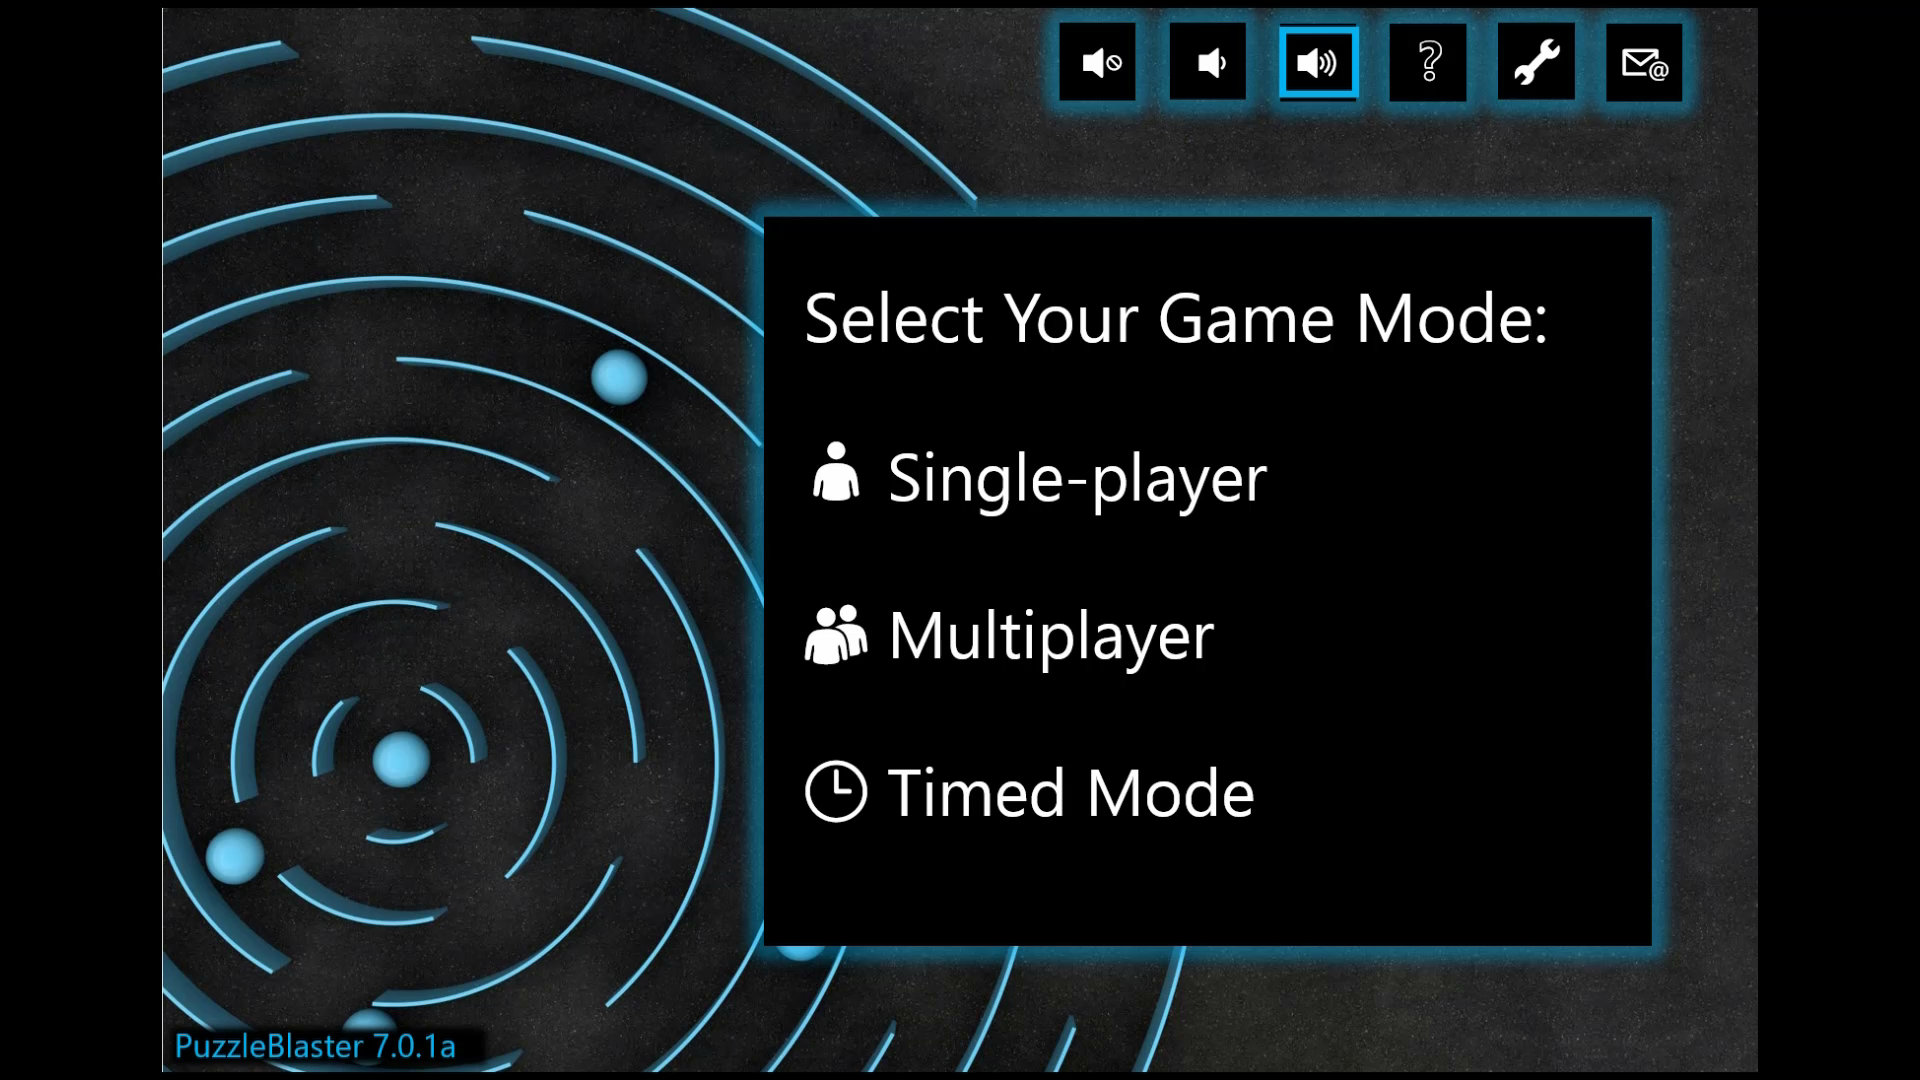 The main menu of a fake game called PuzzleBlaster. The menu says, "Select your game mode: single-player, multiplayer, or timed mode." There are several buttons in the upper right to control volume and settings.